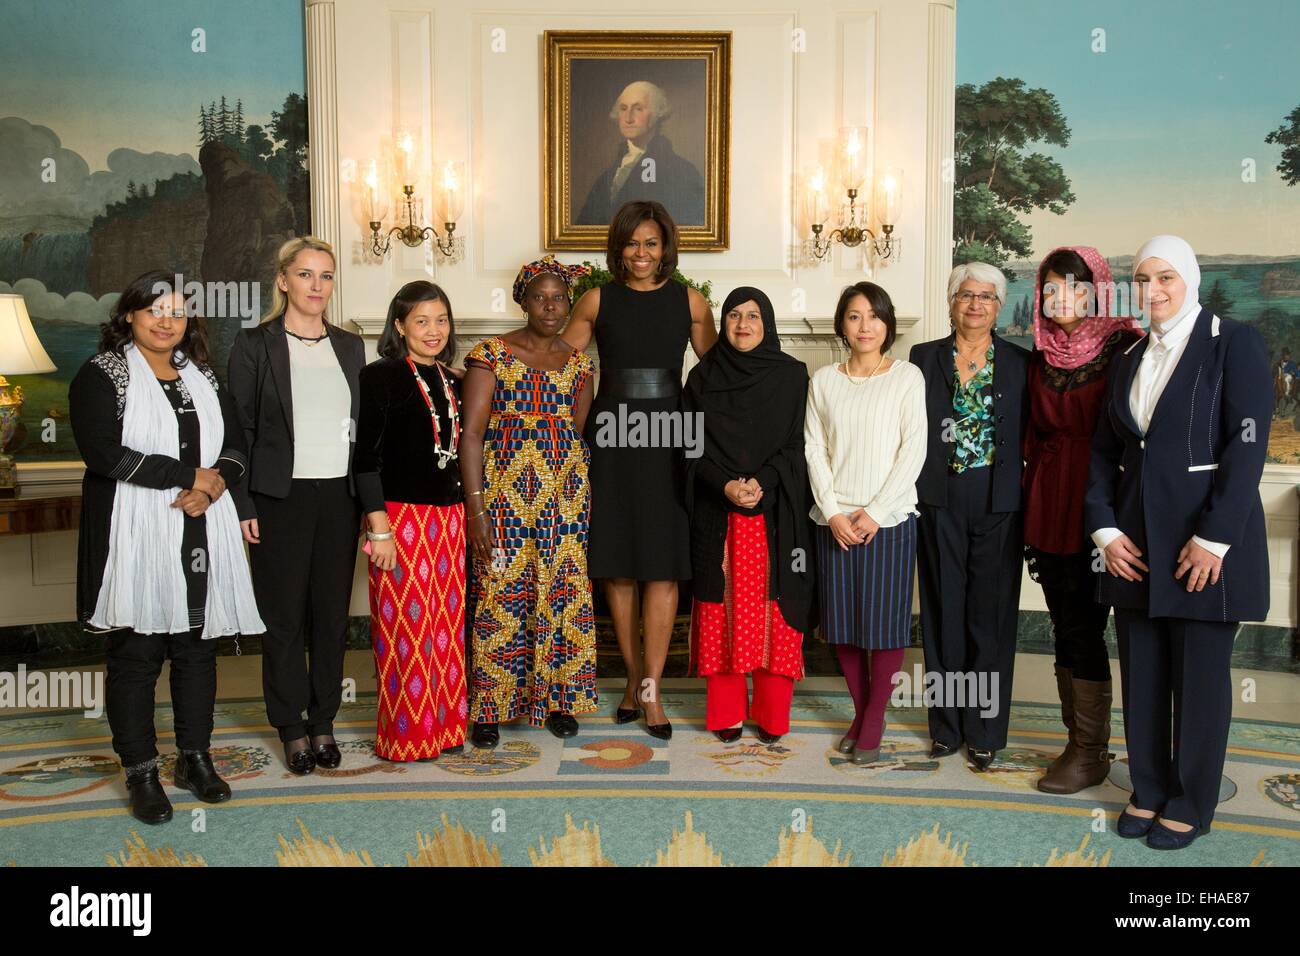 US First Lady Michelle Obama greets recipients of the State Department 2015 International Women of Courage Award recipients in the Diplomatic Reception Room of the White House March 7, 2015 in Washington, DC.  Recipients are Left to Right: Nadia Sharmeen, Bangladesh; Arbana Xharra, Kosovo; May Sabe Phyu, Burma; Marie Claire Tchecola, Guinea; Tabassum Adnan, Pakistan; Sayaka Osakabe, Japan; Rosa Julieta Montano Salvatierra, Bolivia; Captain Niloofar Rahmani; Afghanistan; Majd Chourbaji, Syria. Stock Photo